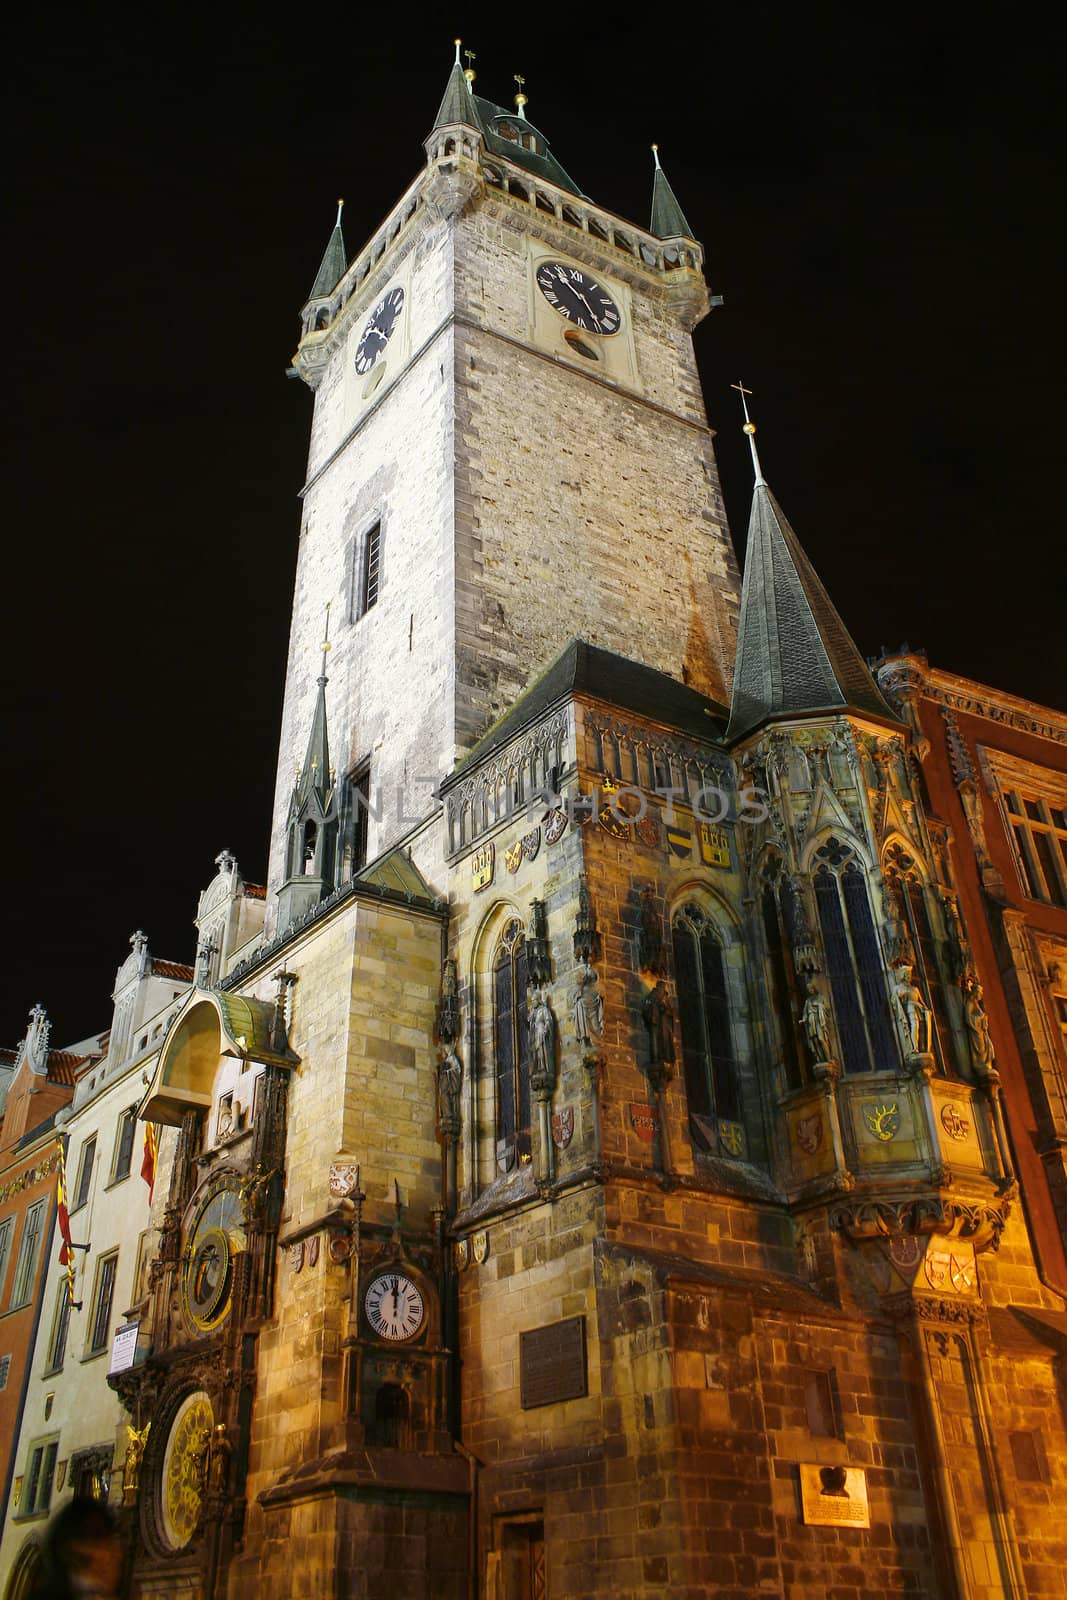 Tower with astronomical clock at Prague city, Czech Republic, at night